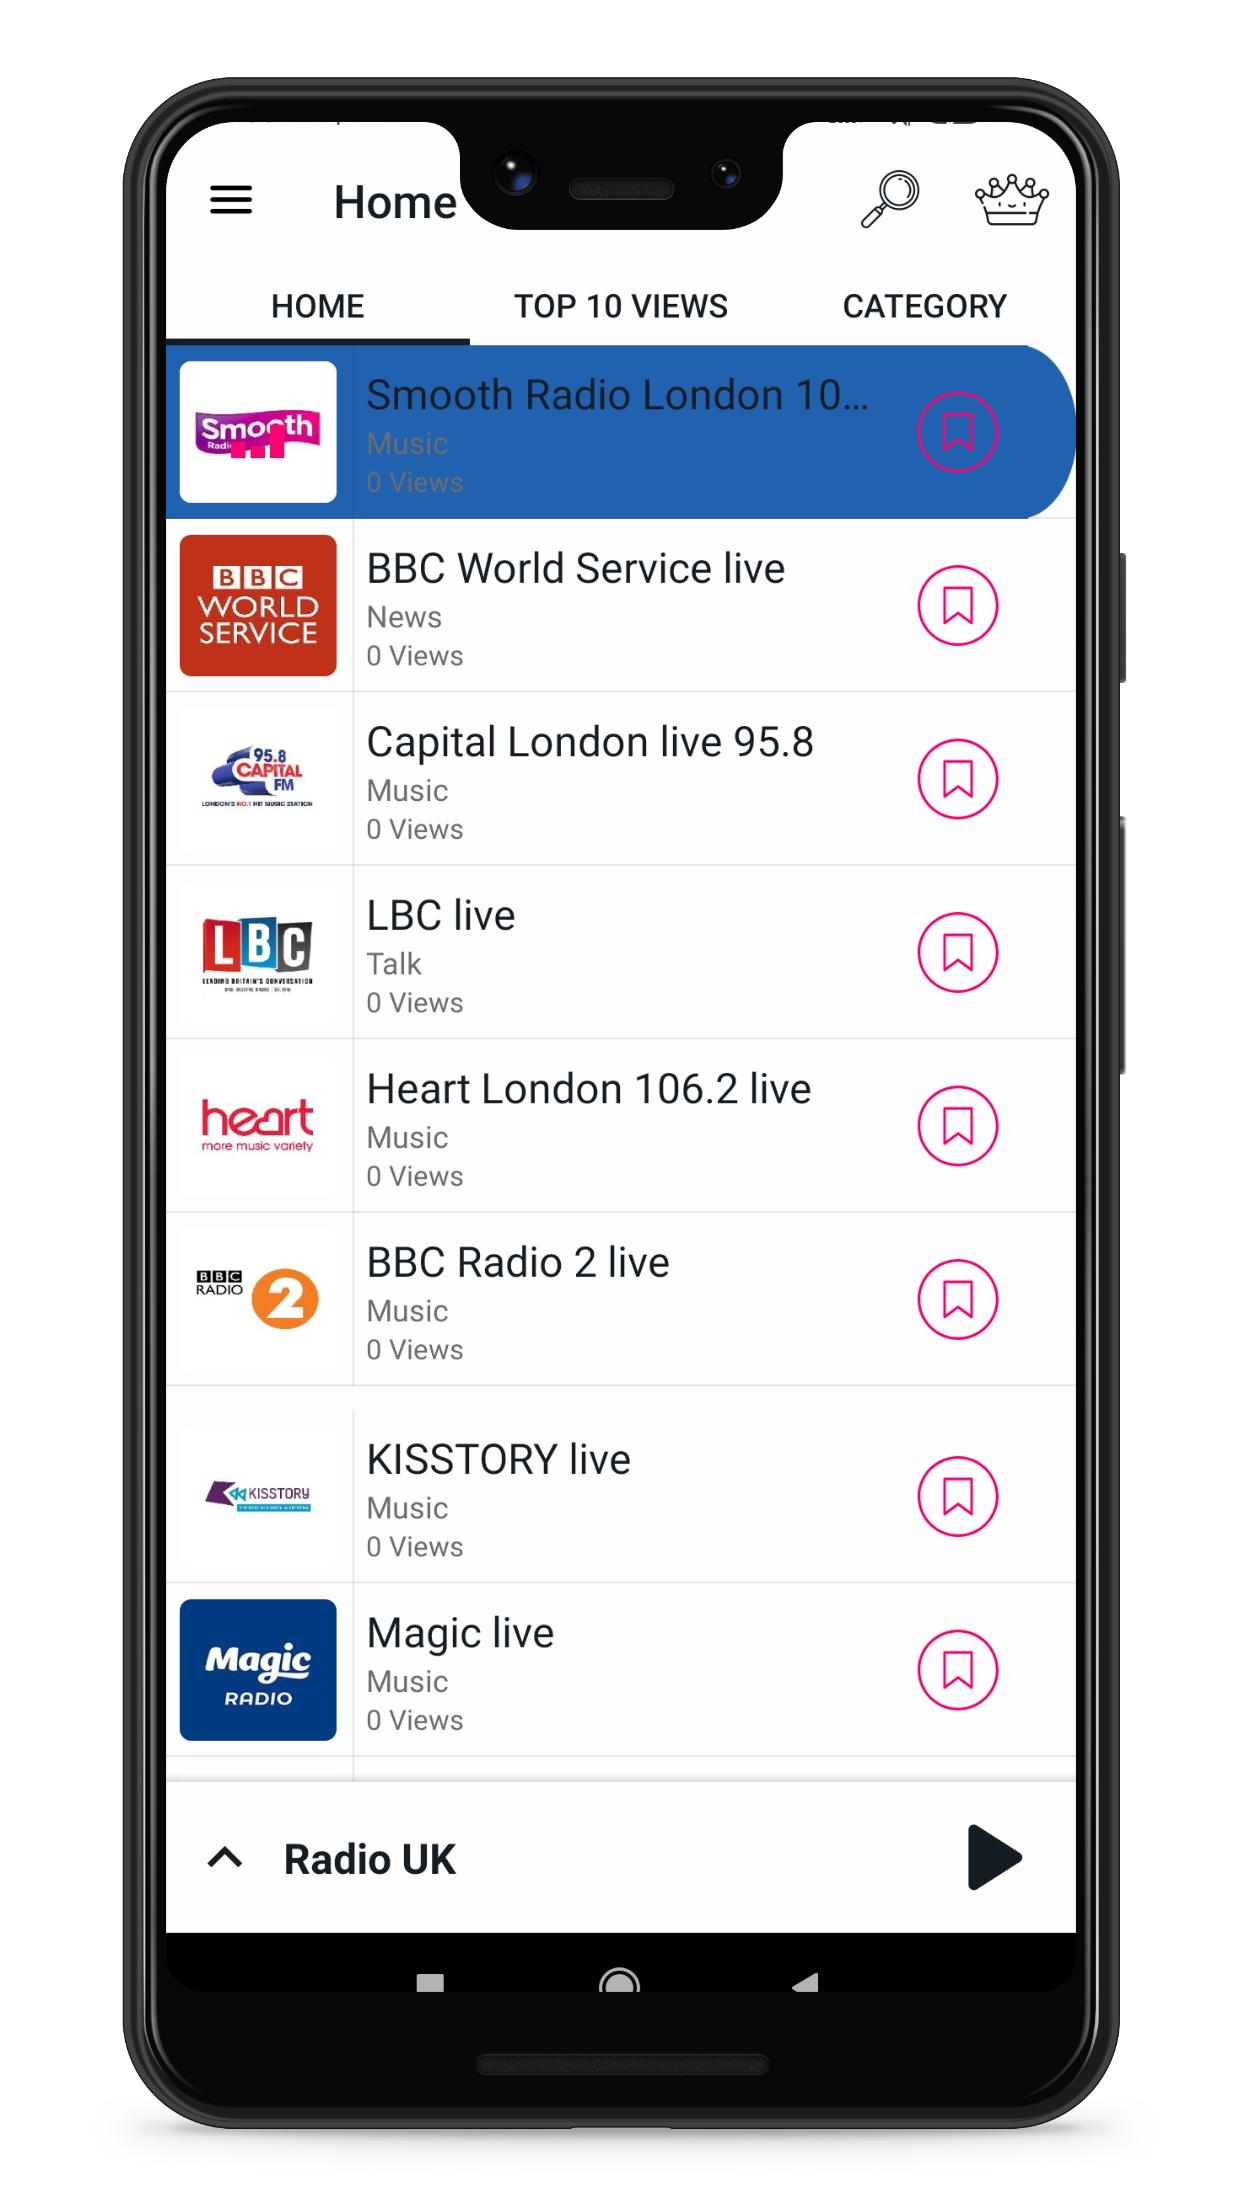 Radio UK FM Online Radio Stations for Android - APK Download